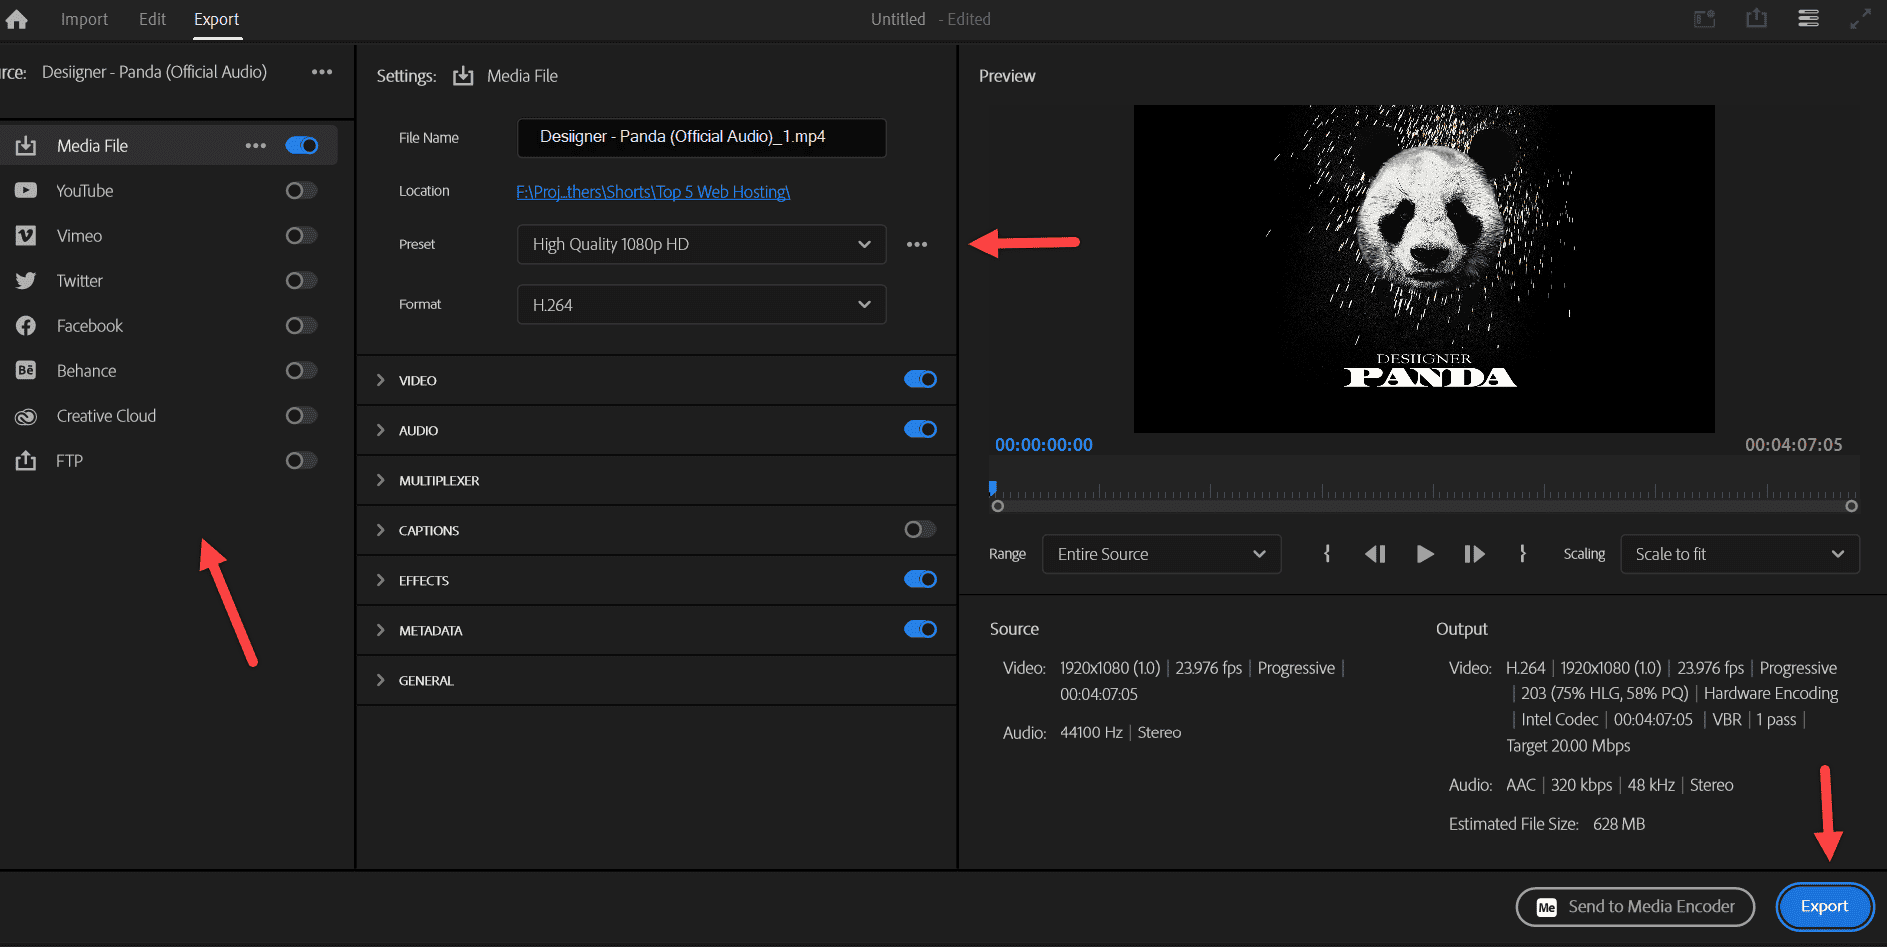 Exporting video on 1080P